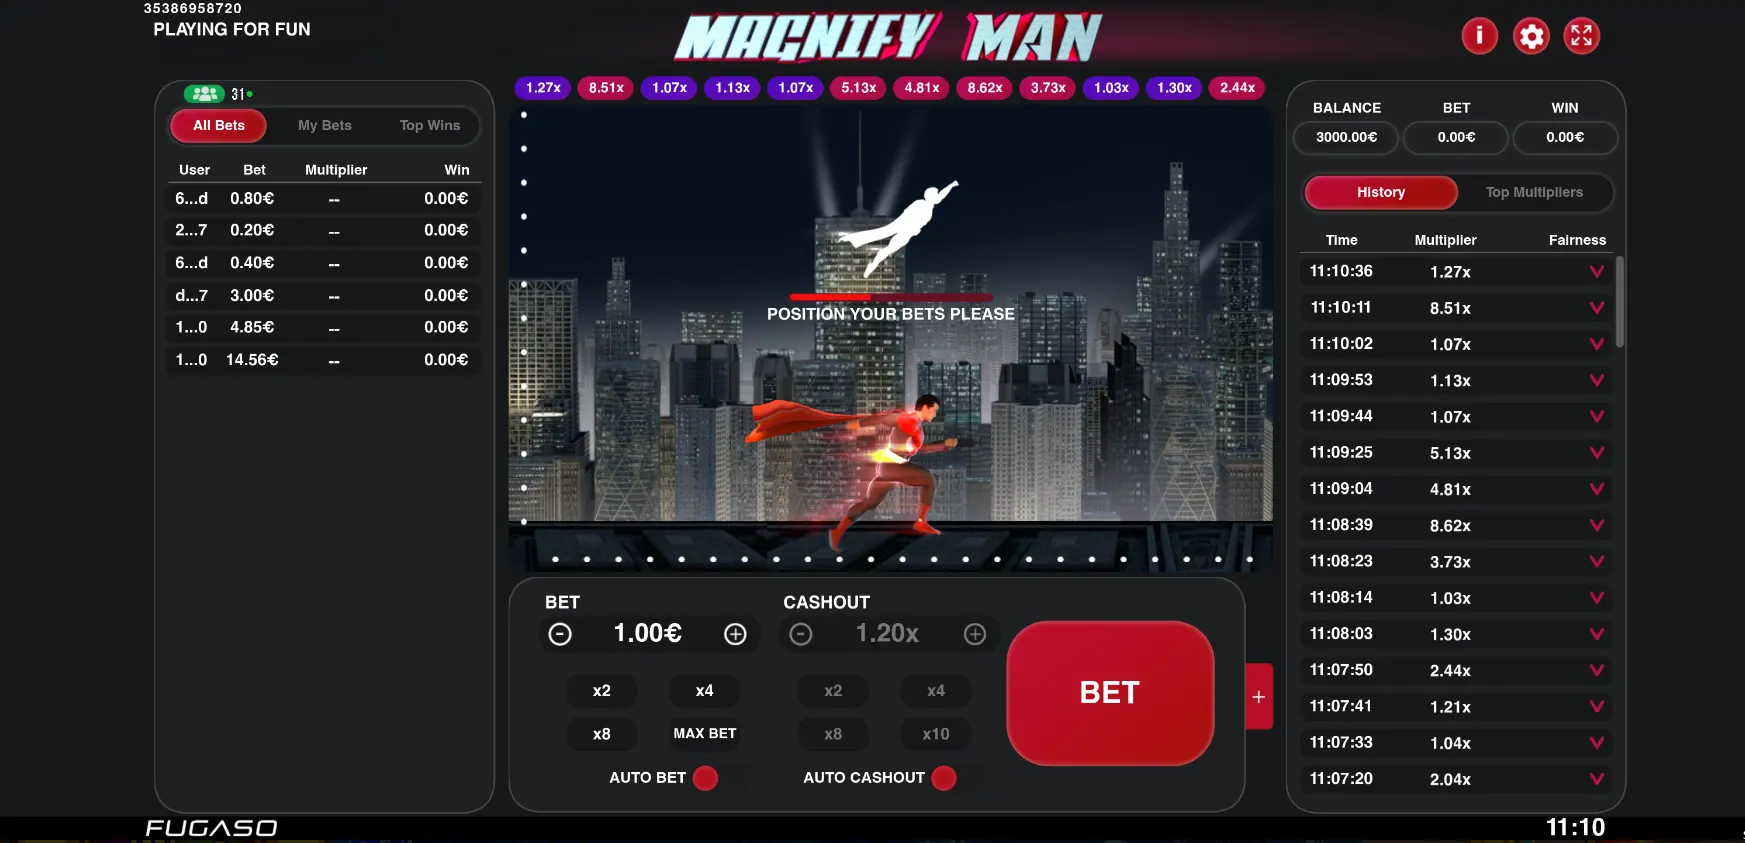 Magnify Man Theme, Graphics, and Sounds